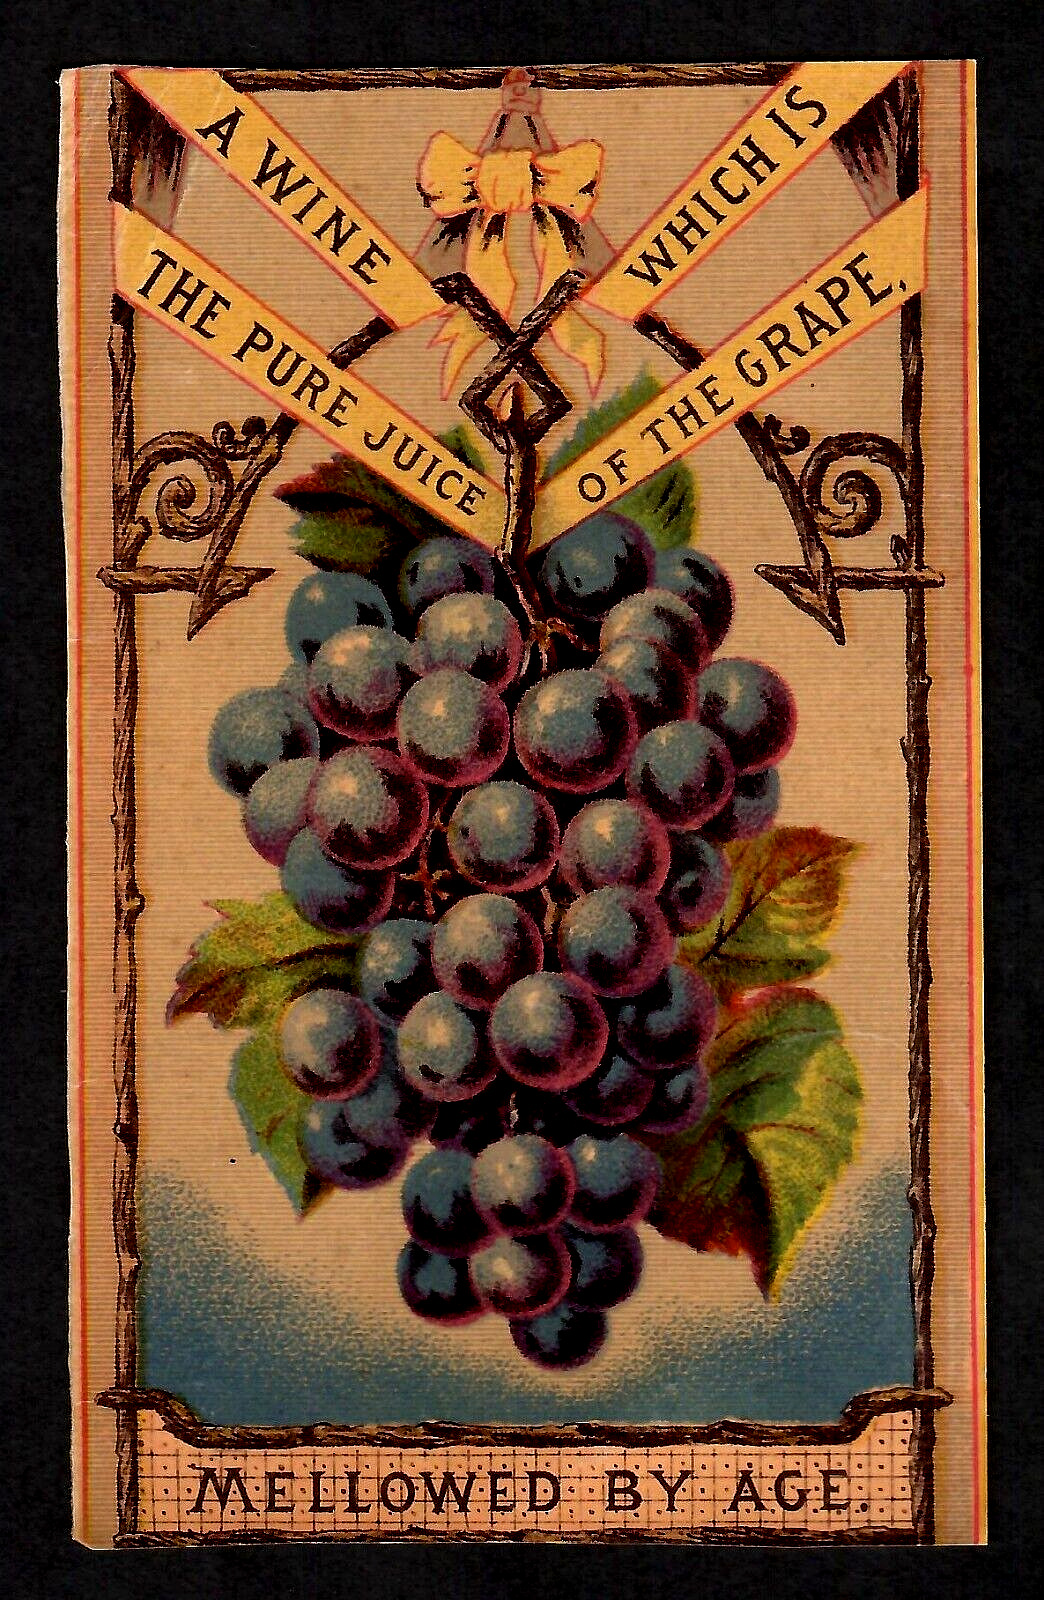 THURBER WINE TRADE CARD~REVERSE TELLS STORY OF DR UNDERHILLS CROTON POINT GRAPES